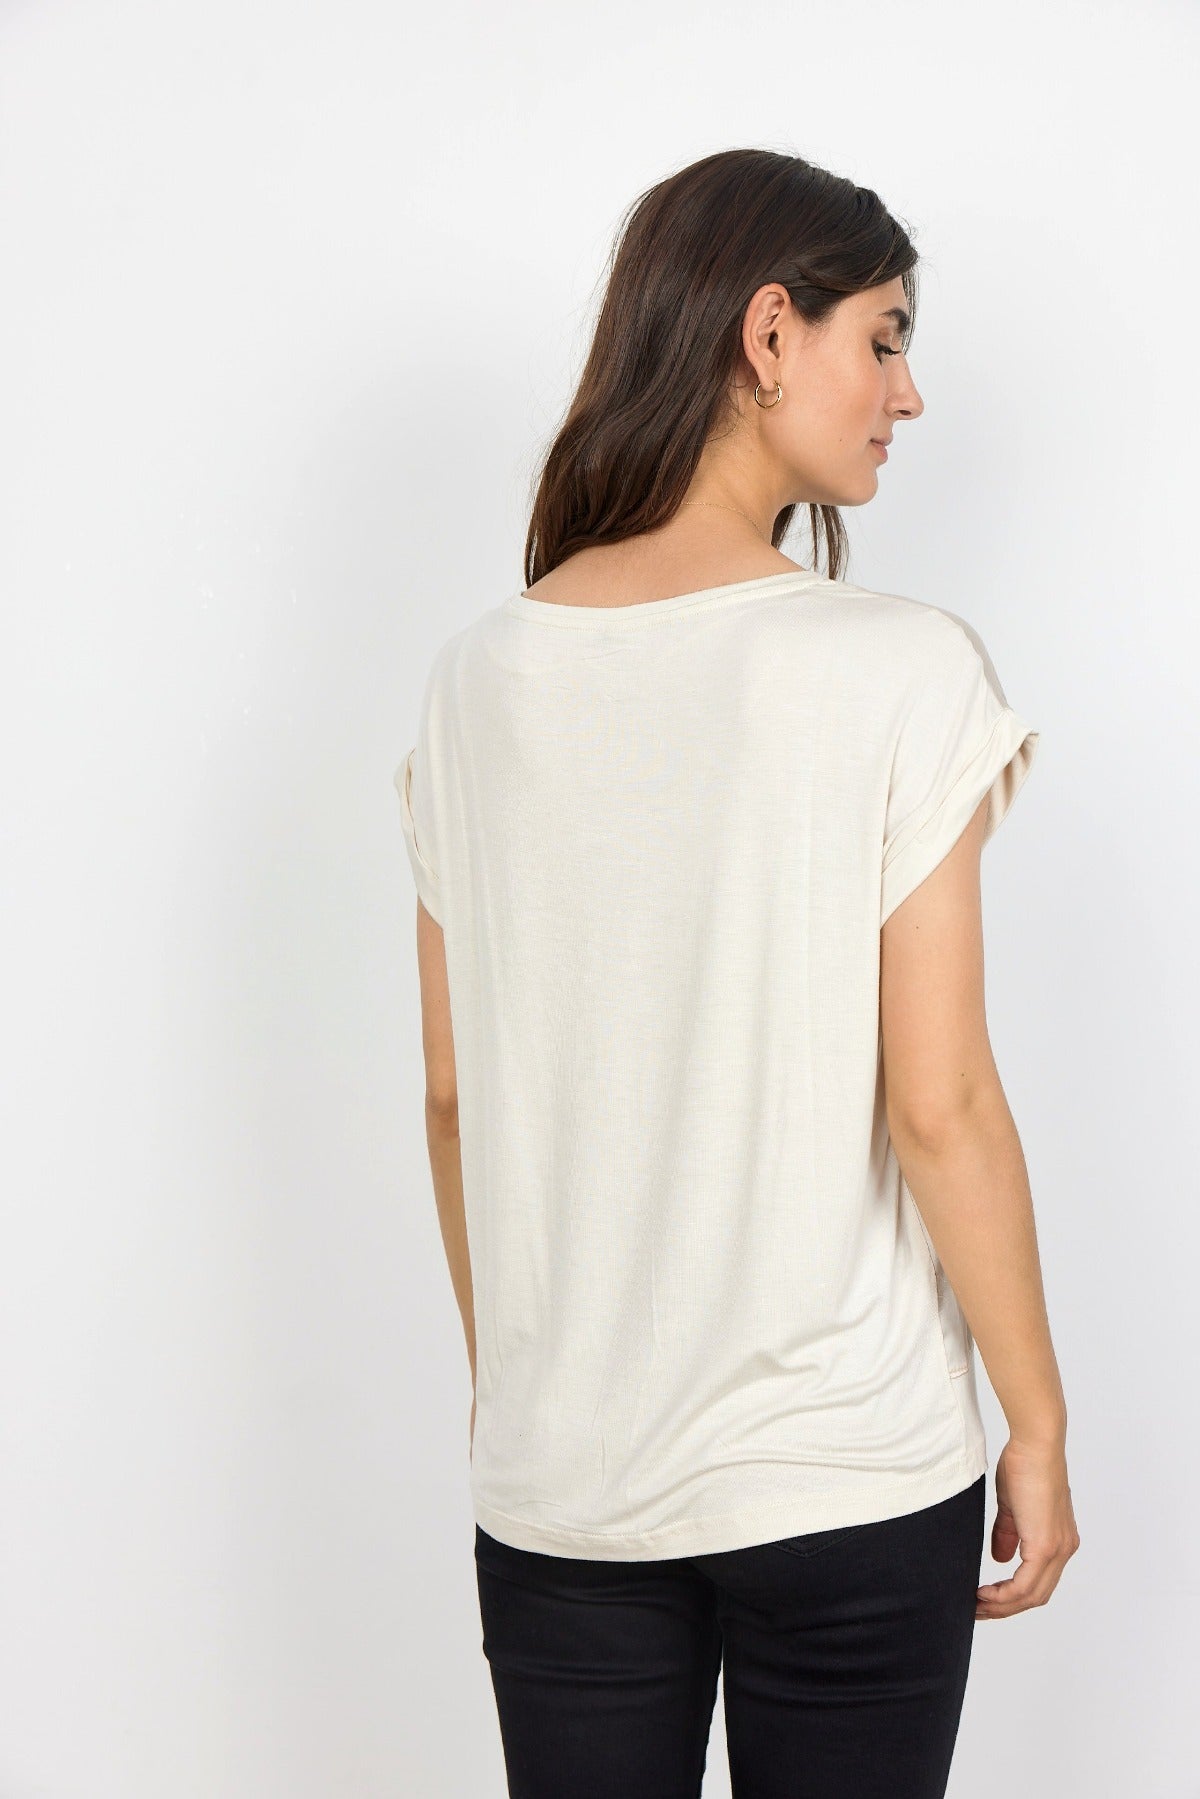 The Thilde Top in Cream